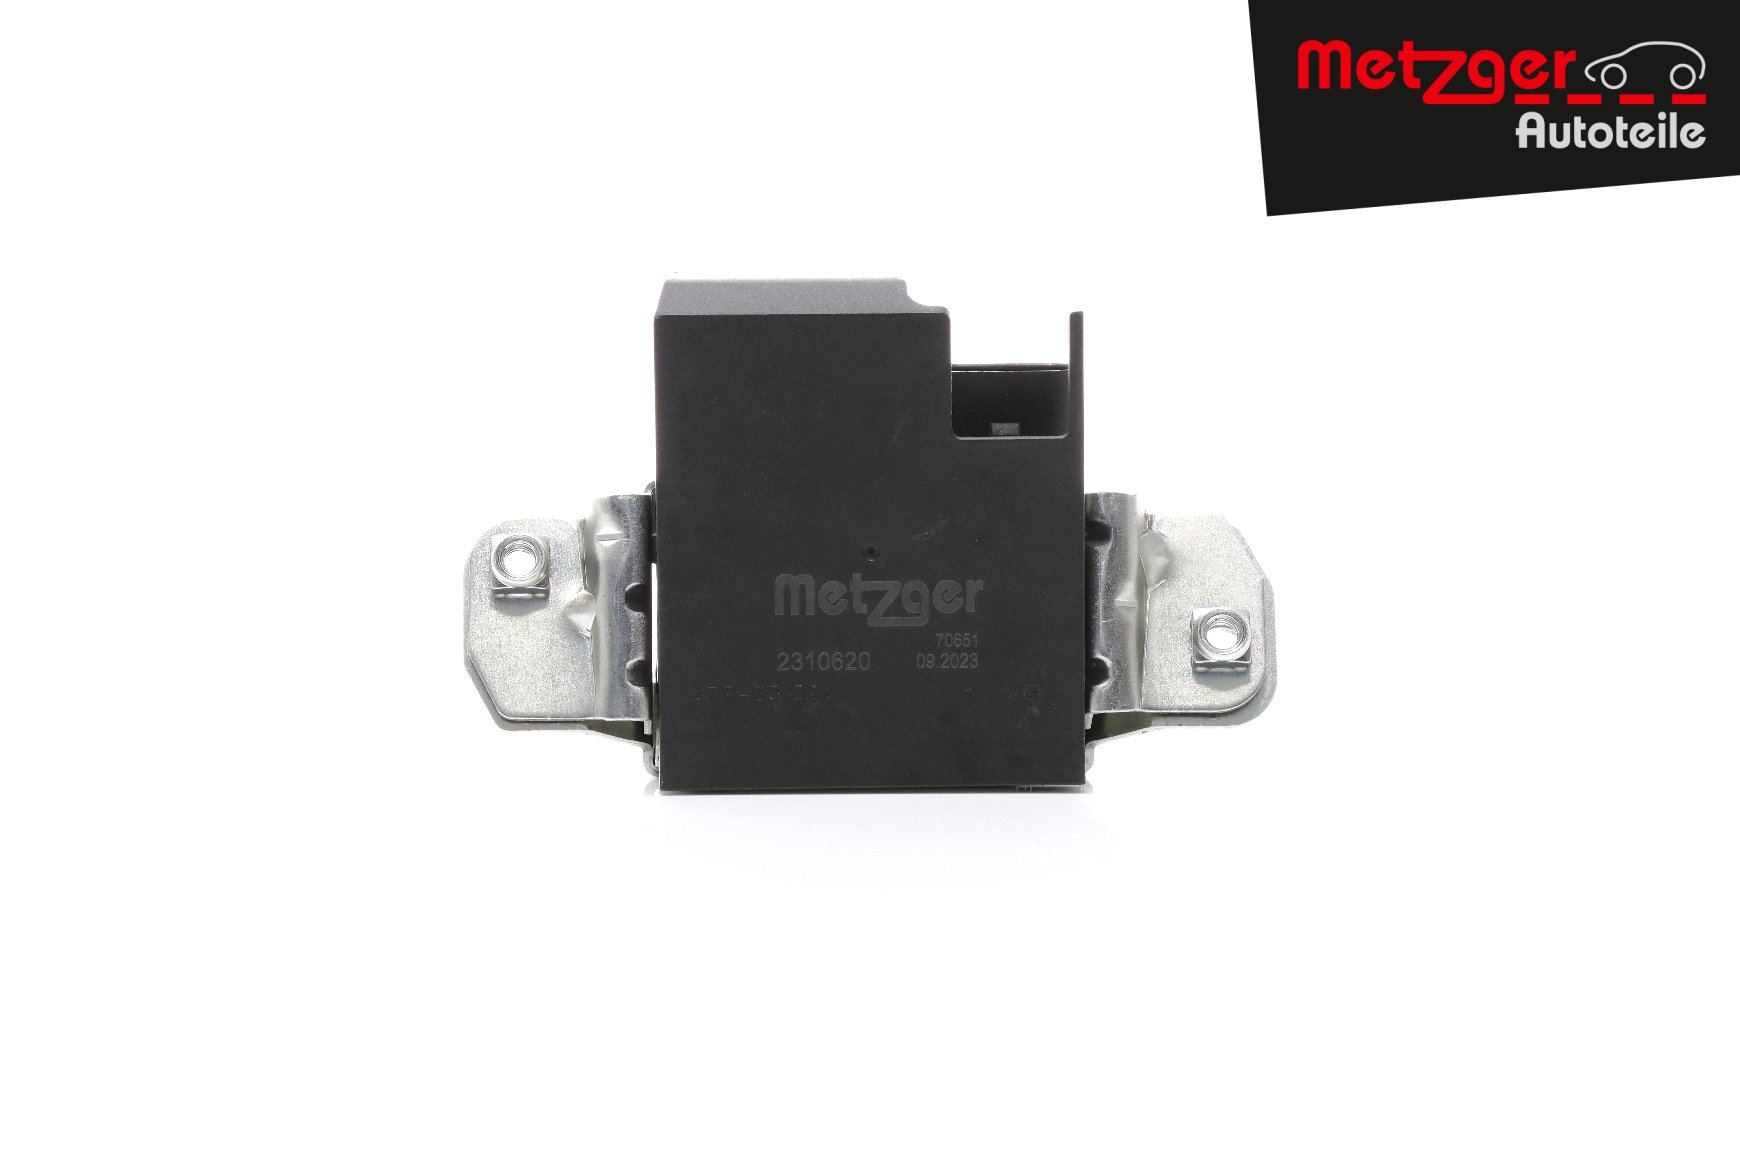 Great value for money - METZGER Tailgate Lock 2310620